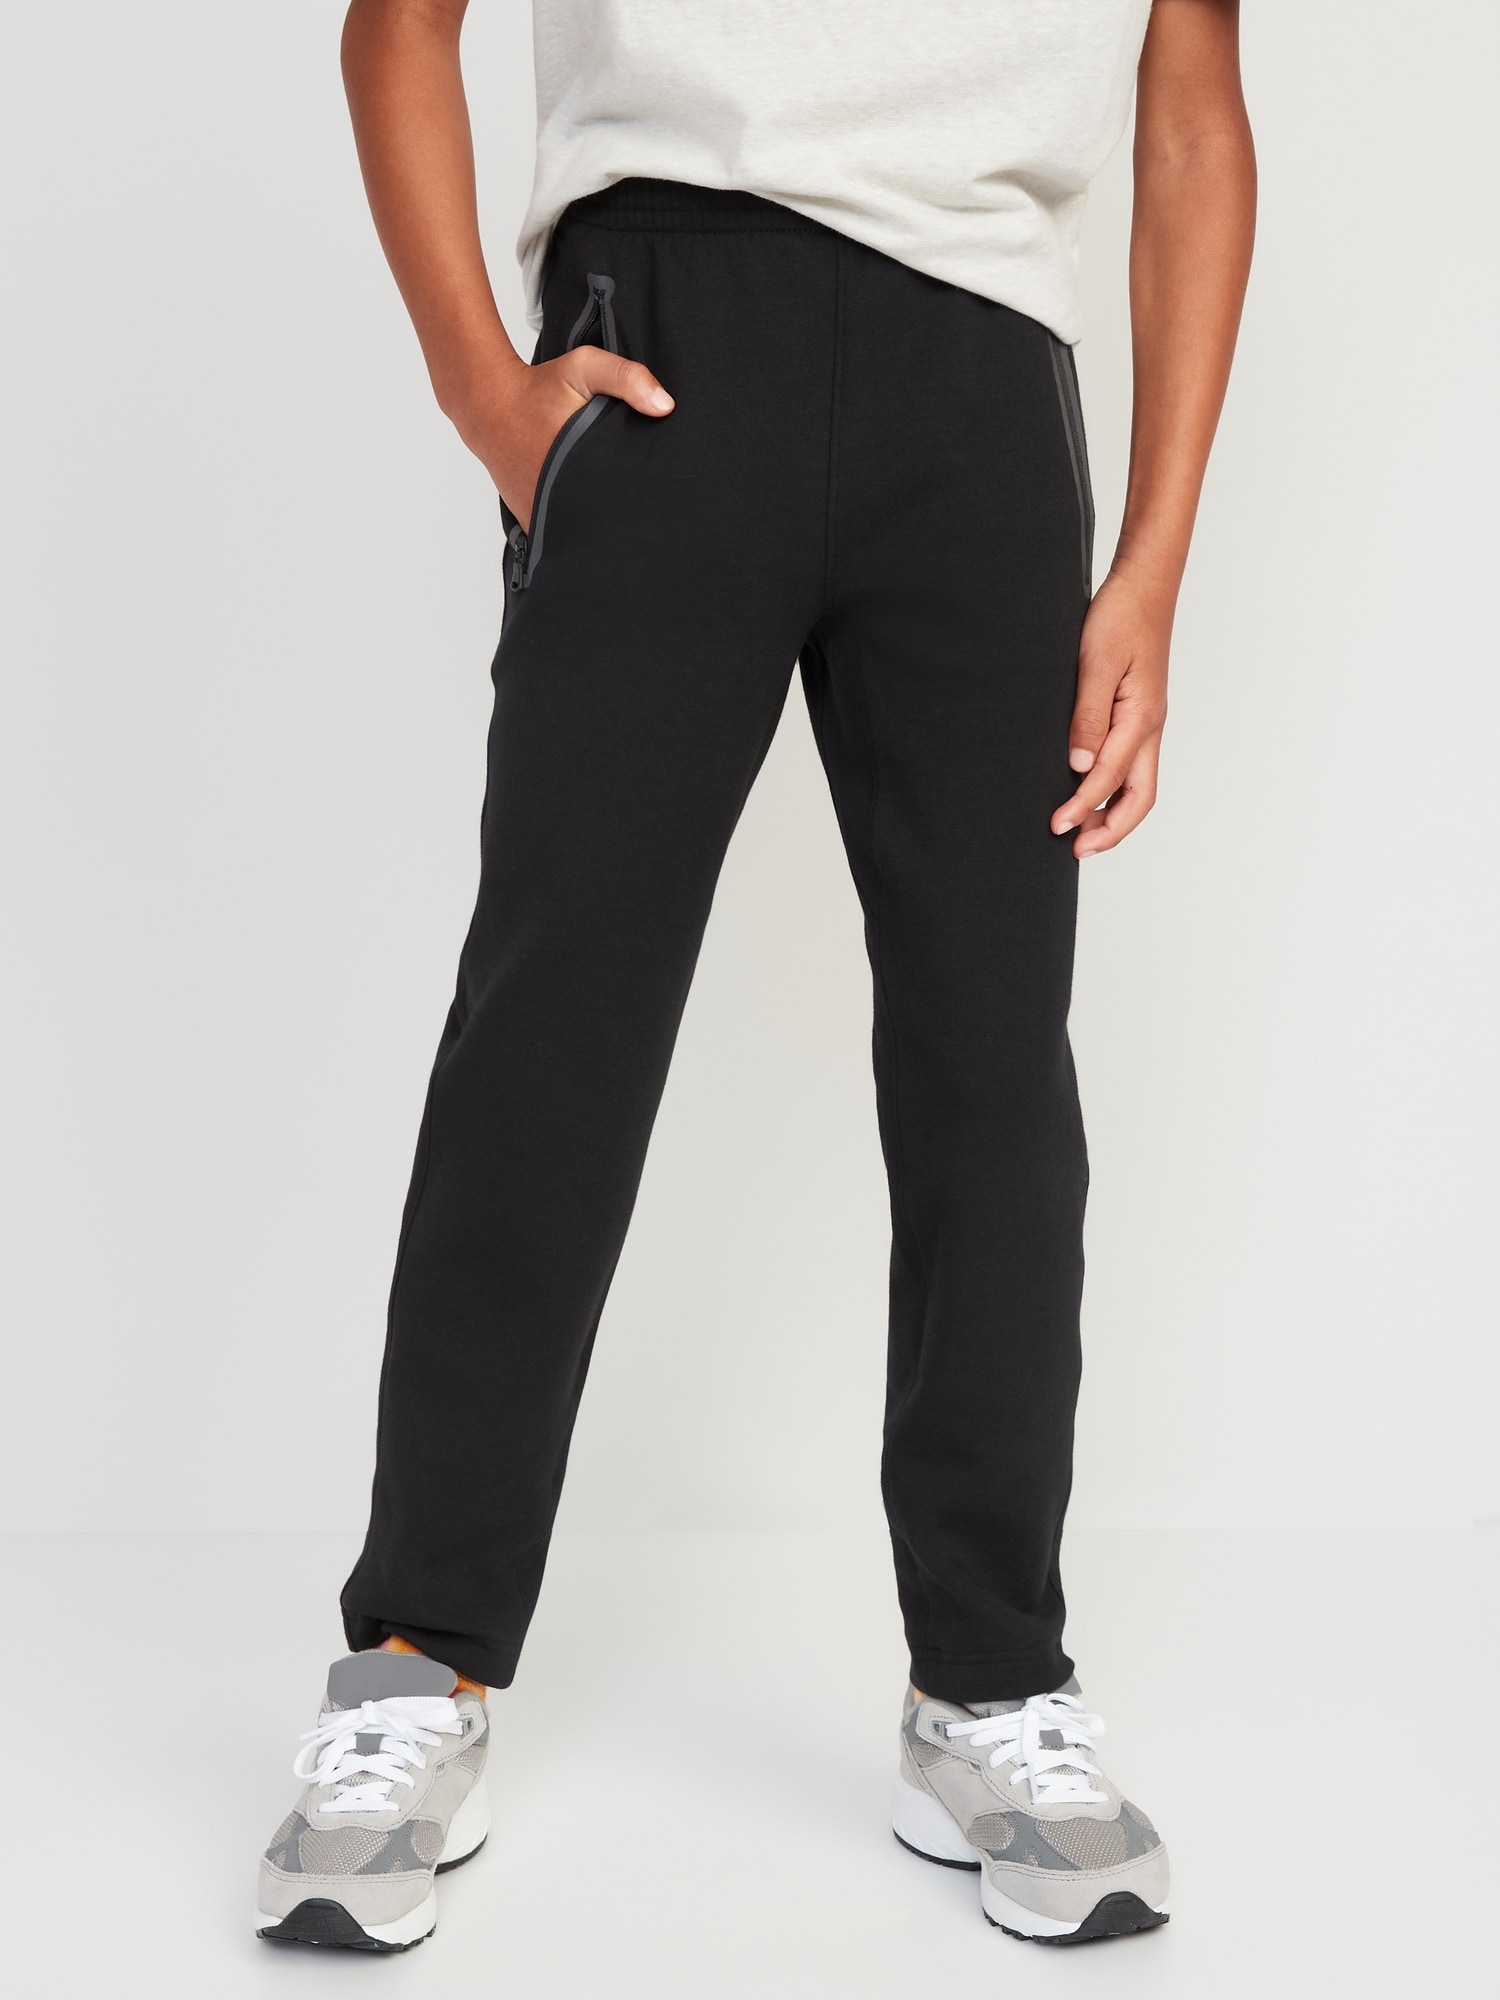 Old Navy Dynamic Fleece Tapered Sweatpants